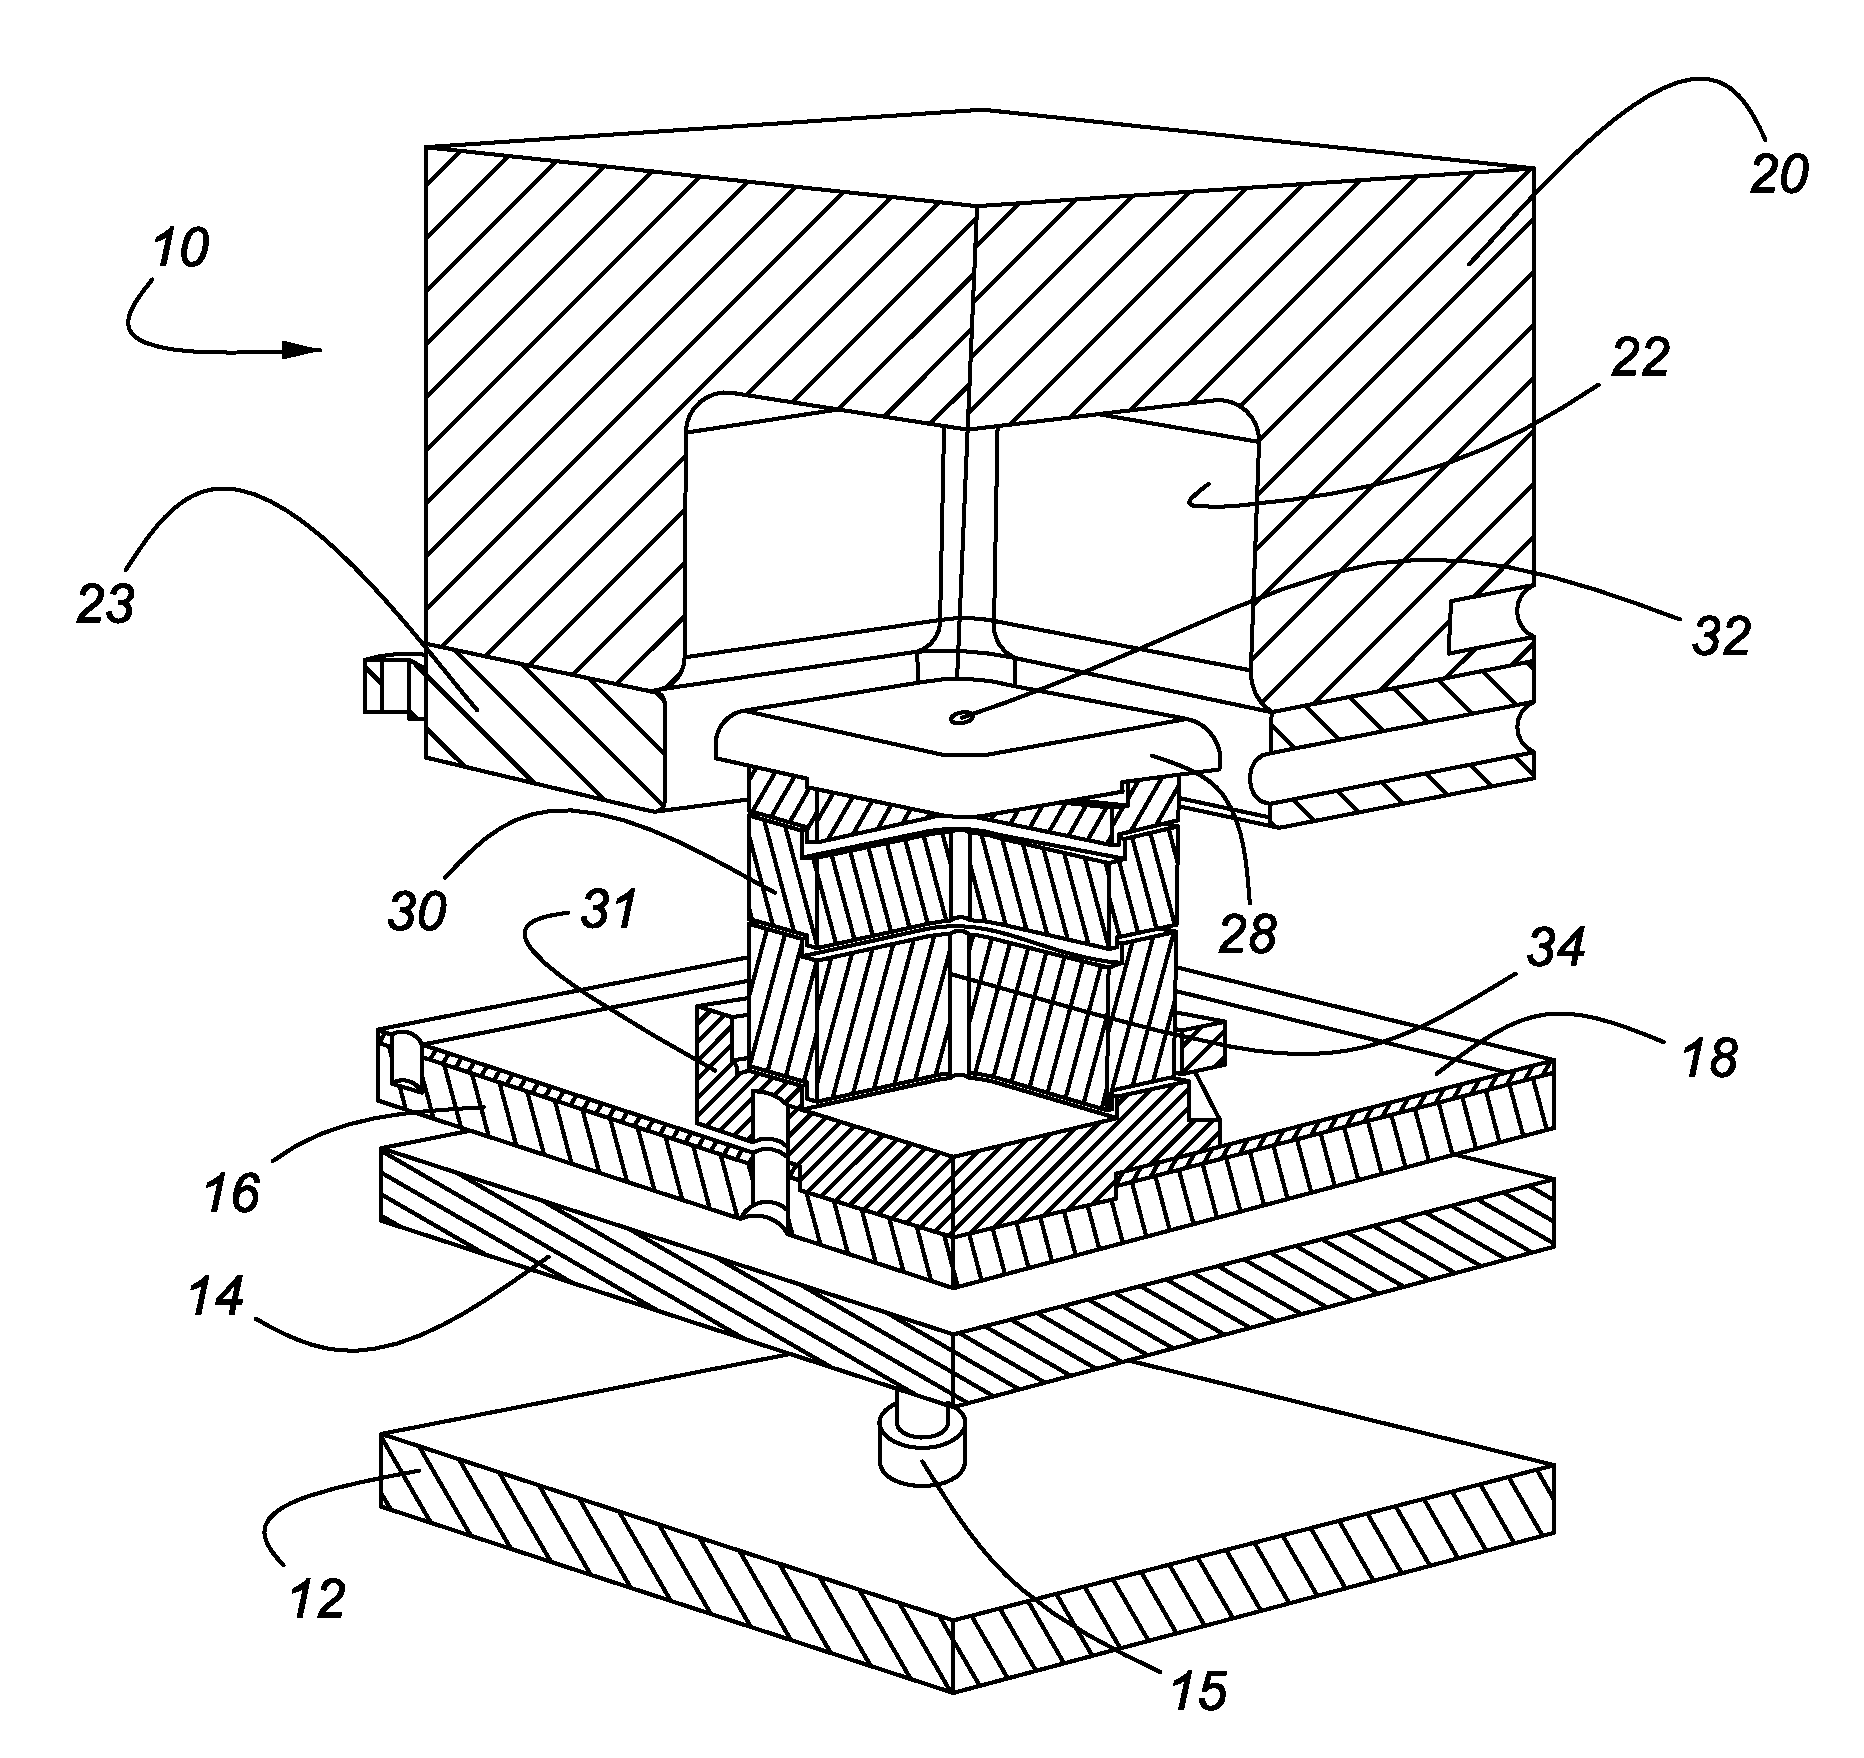 Method and apparatus for gas management in hot blow-forming dies